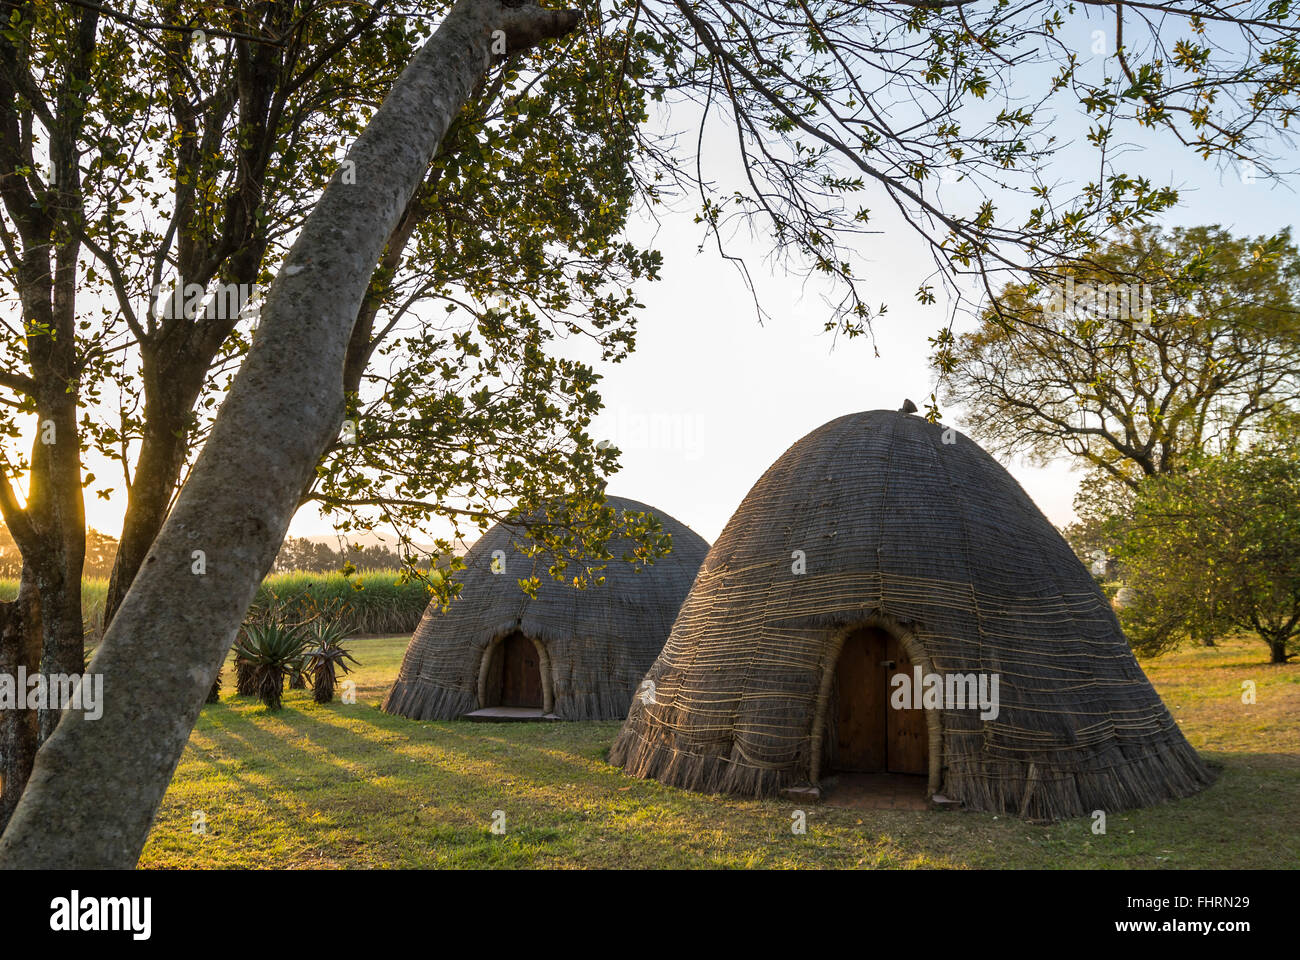 Beehive huts, Round huts made of bamboo, museum village, Kingdom of Swaziland Stock Photo